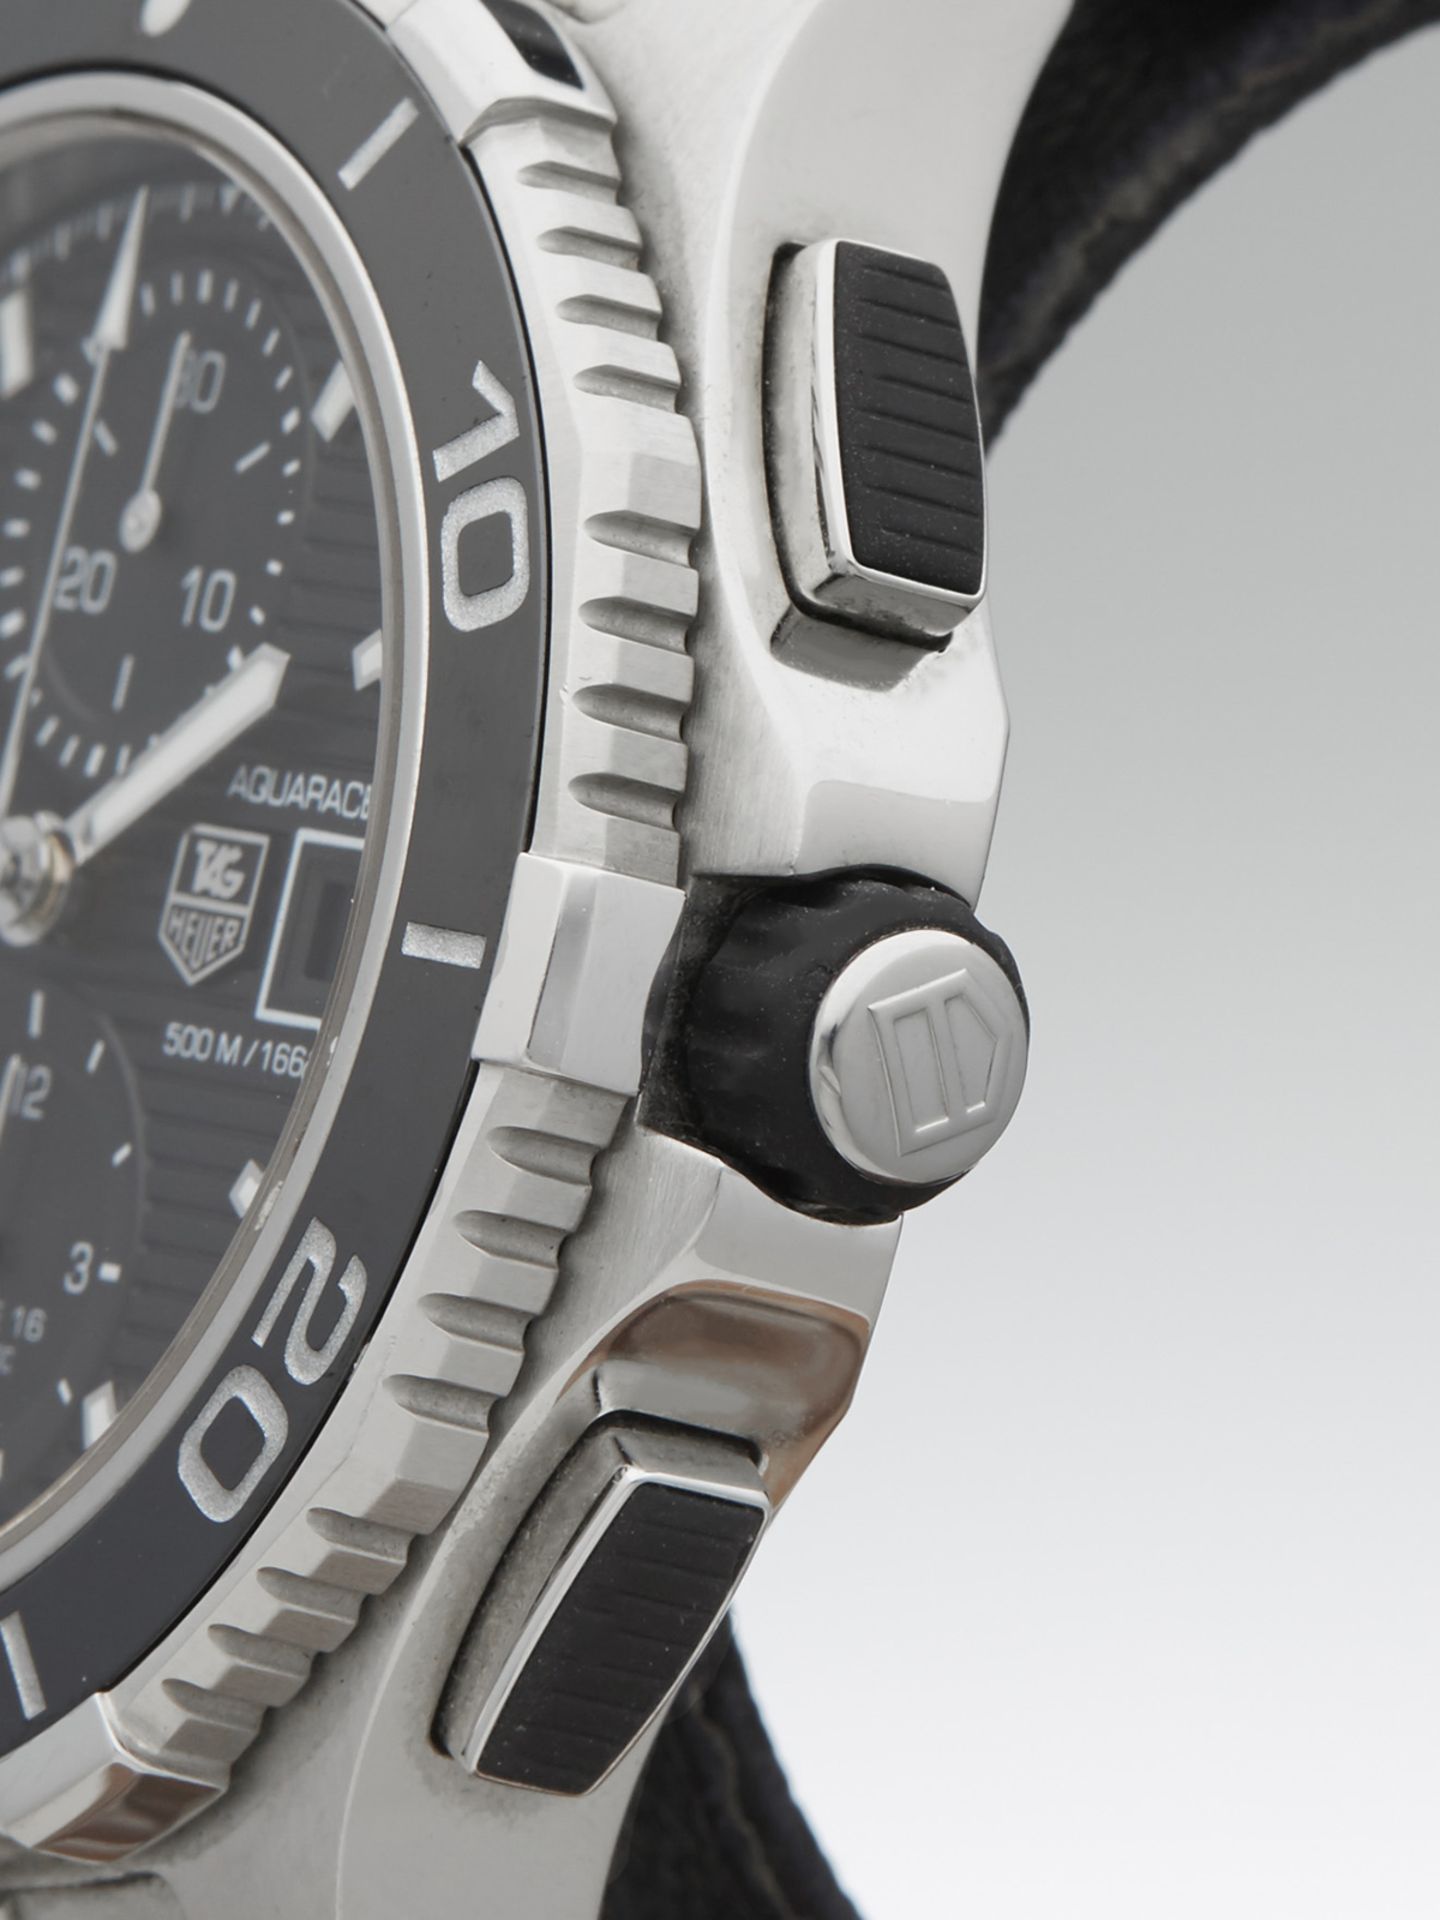 Tag Heuer Aquaracer Chronograph Ceramic 43mm Stainless Steel CAK2110.BA0833 - Image 4 of 9